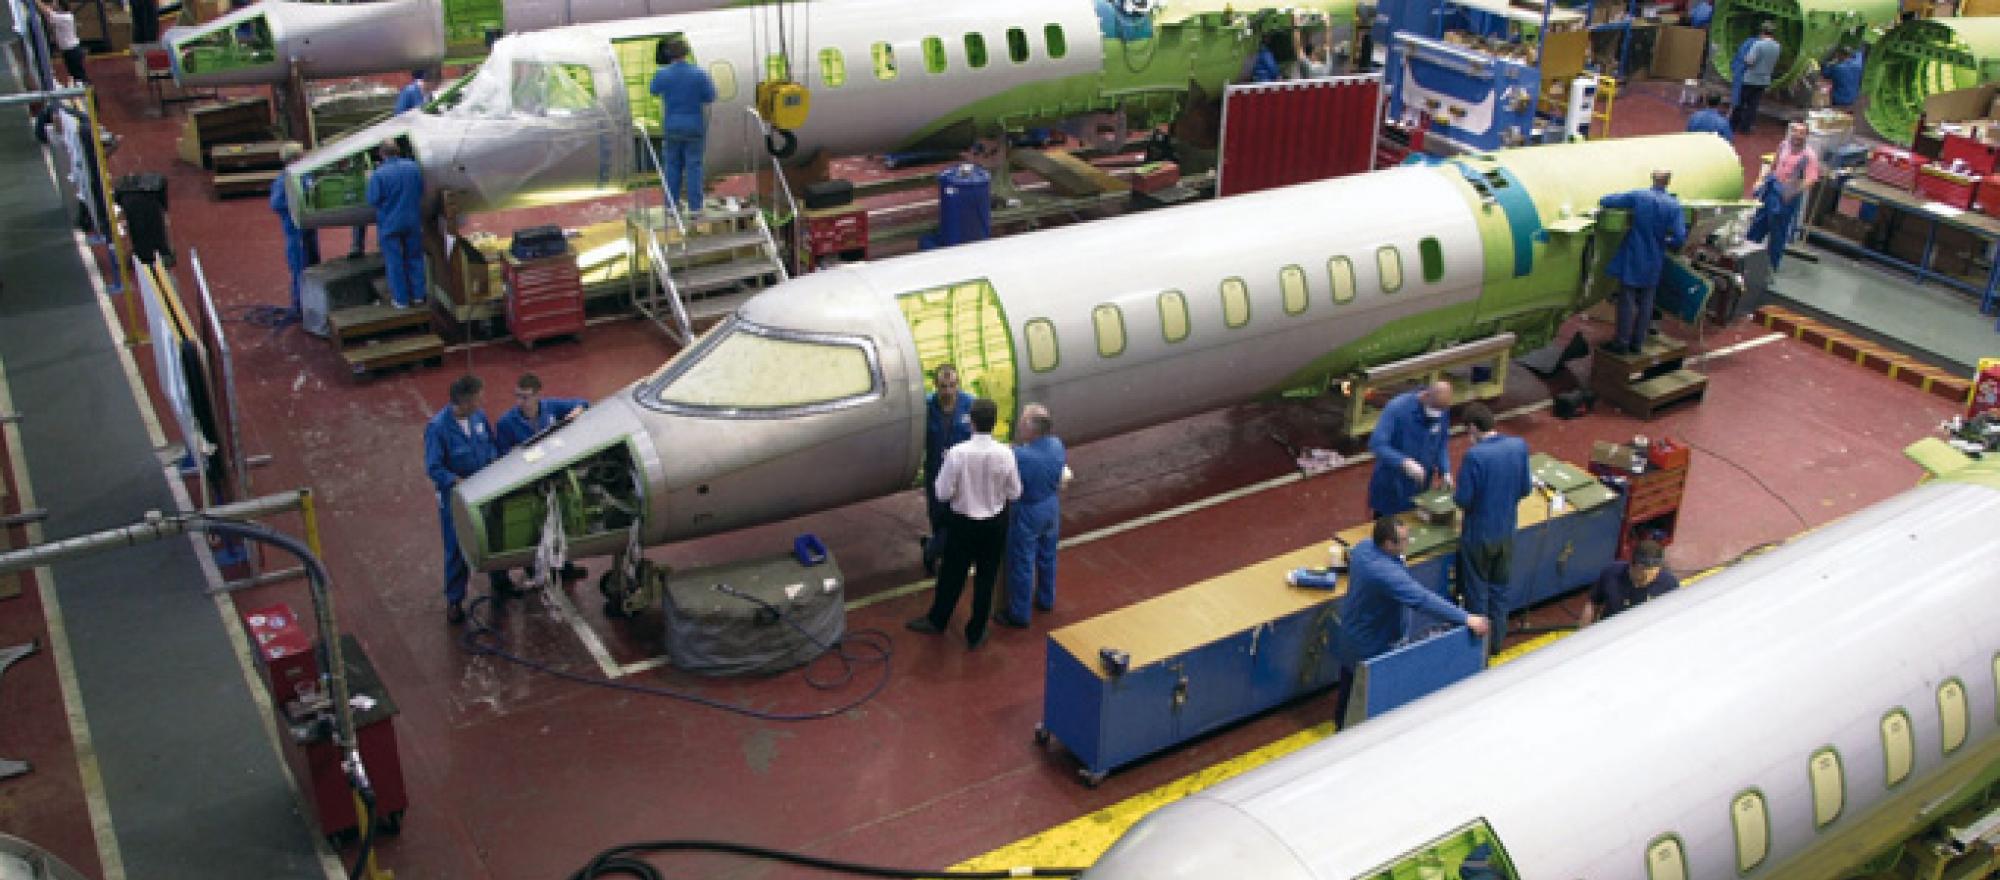 National Geographic Channel Documents Making of a Learjet